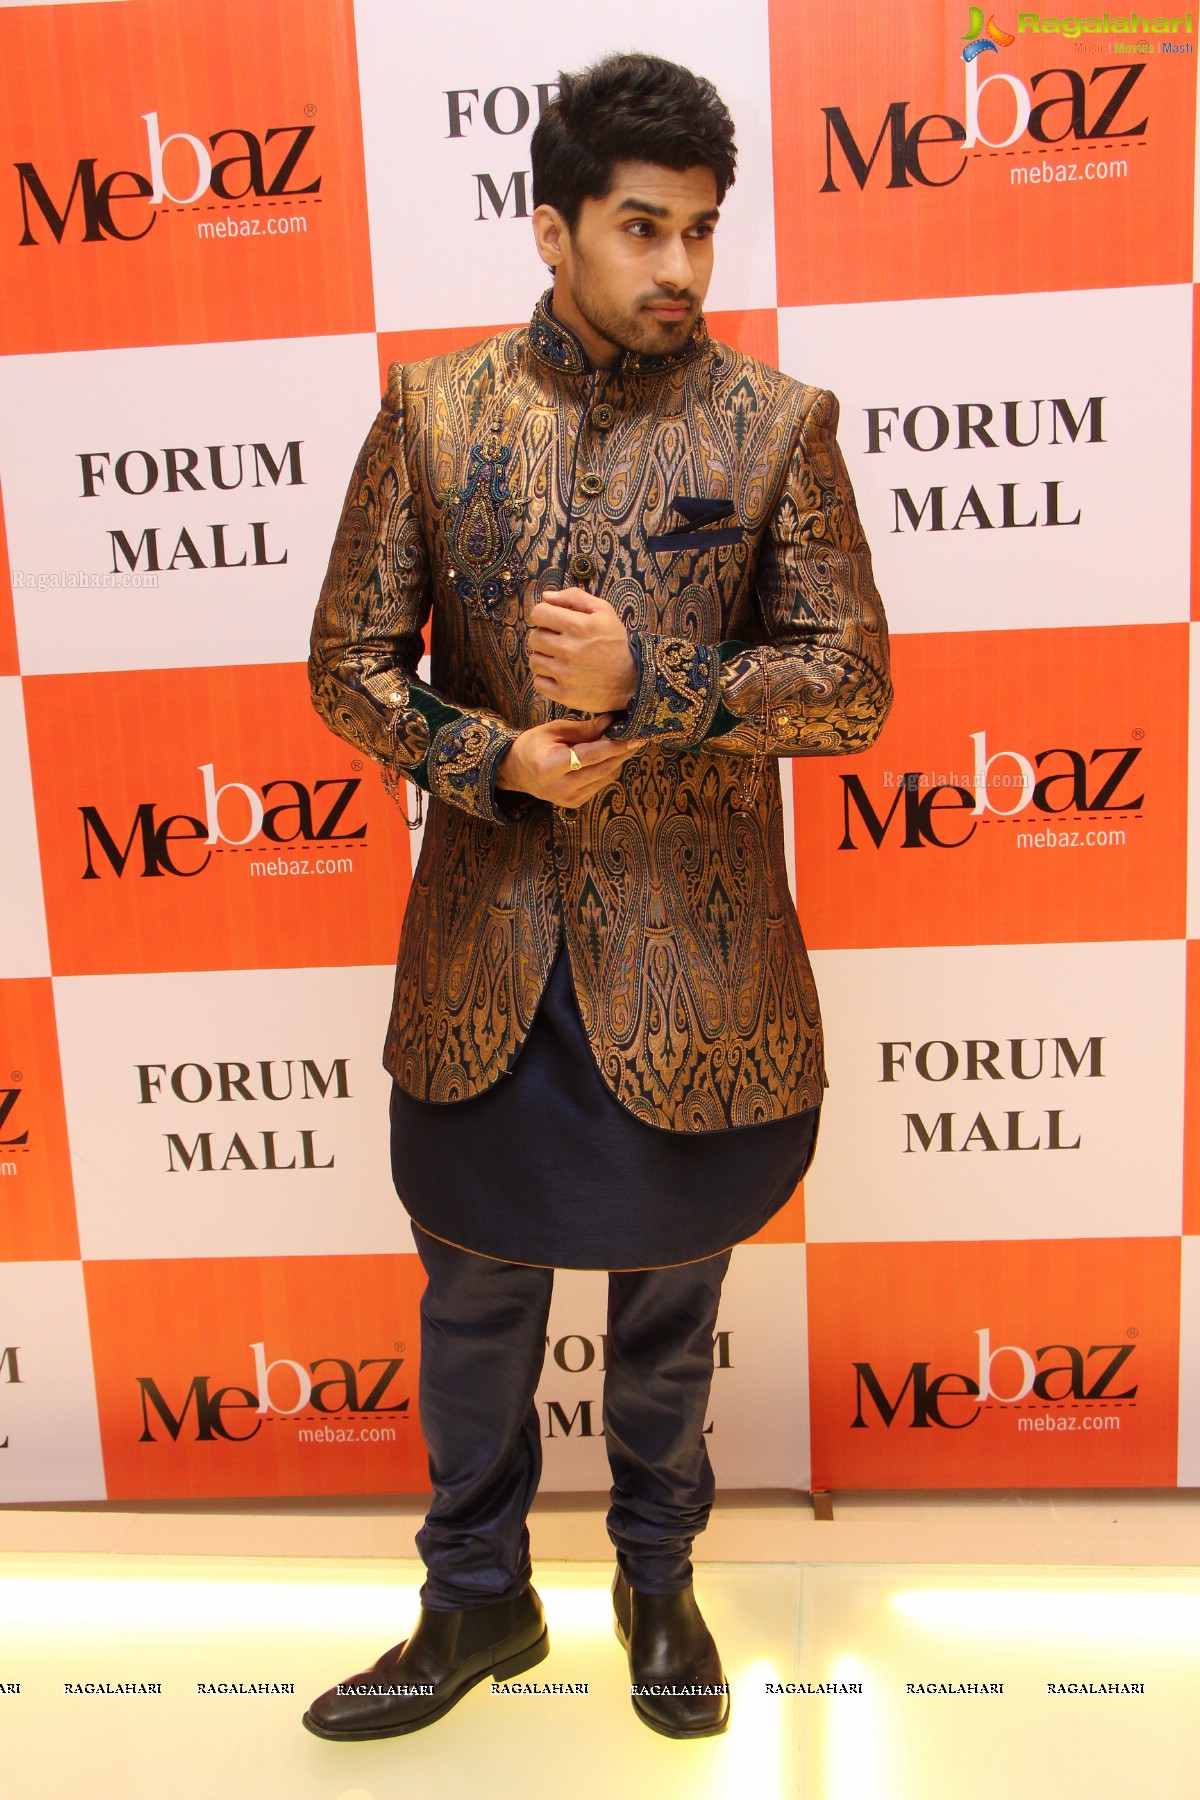 The Exclusive Mebaz Family Collection & Cocktail Bridal Fiesta Launch